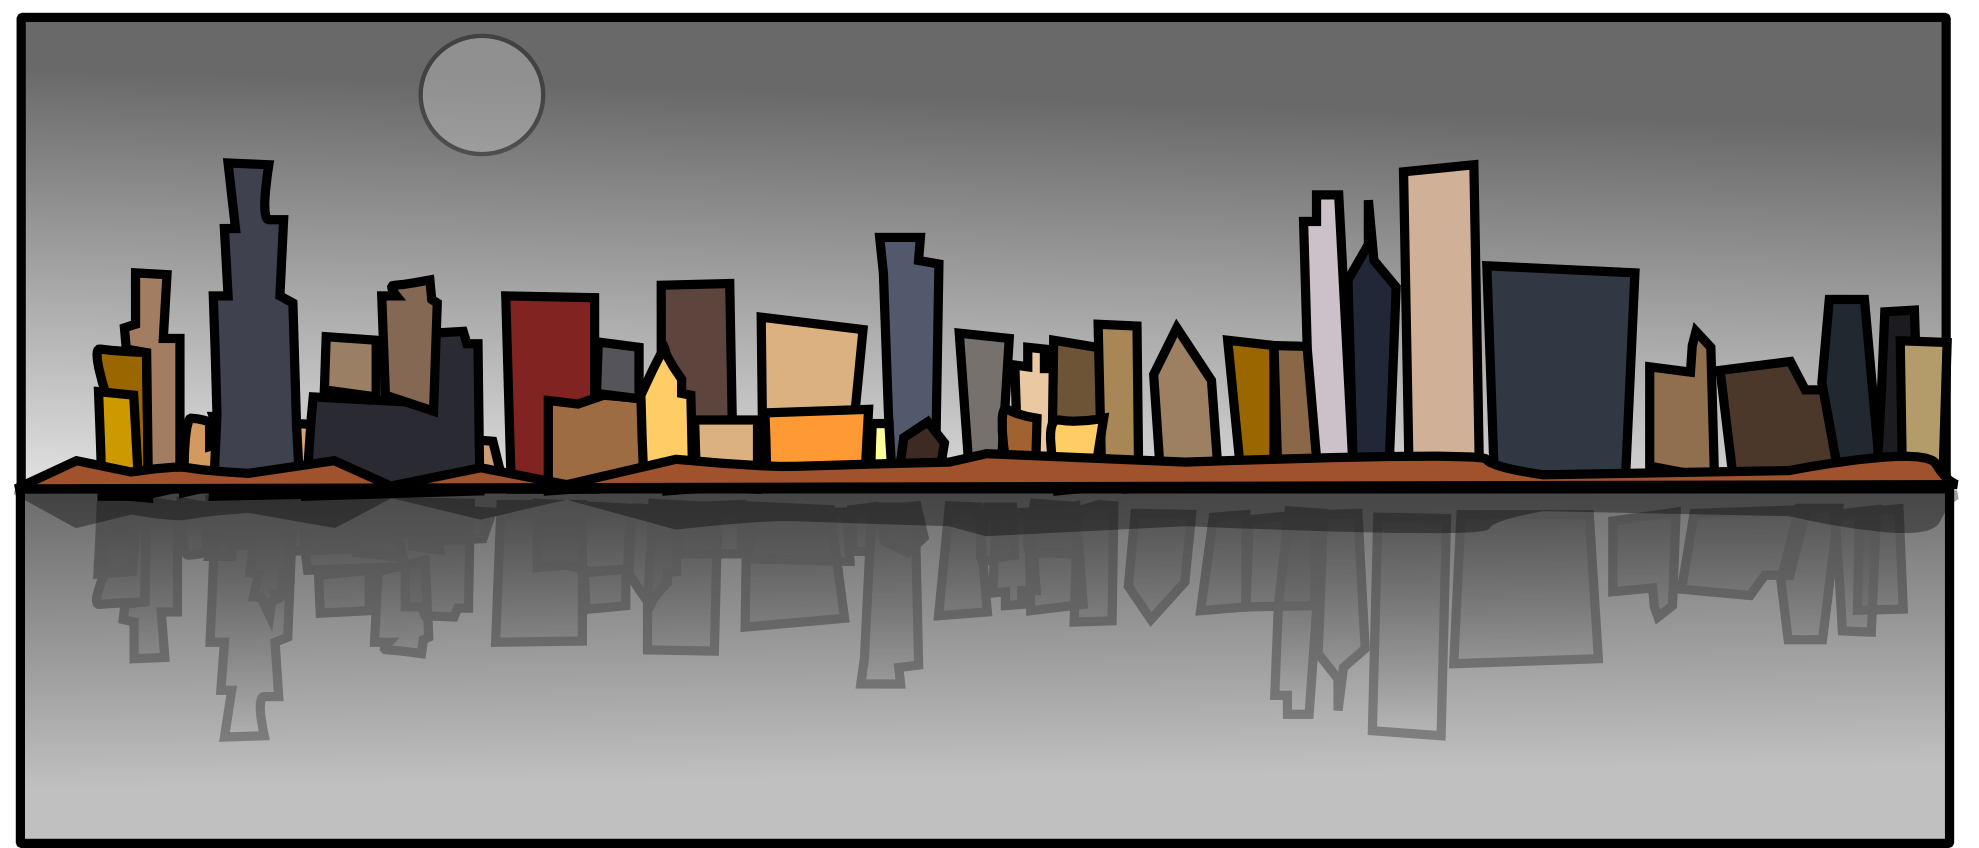 Chicago svg #12, Download drawings